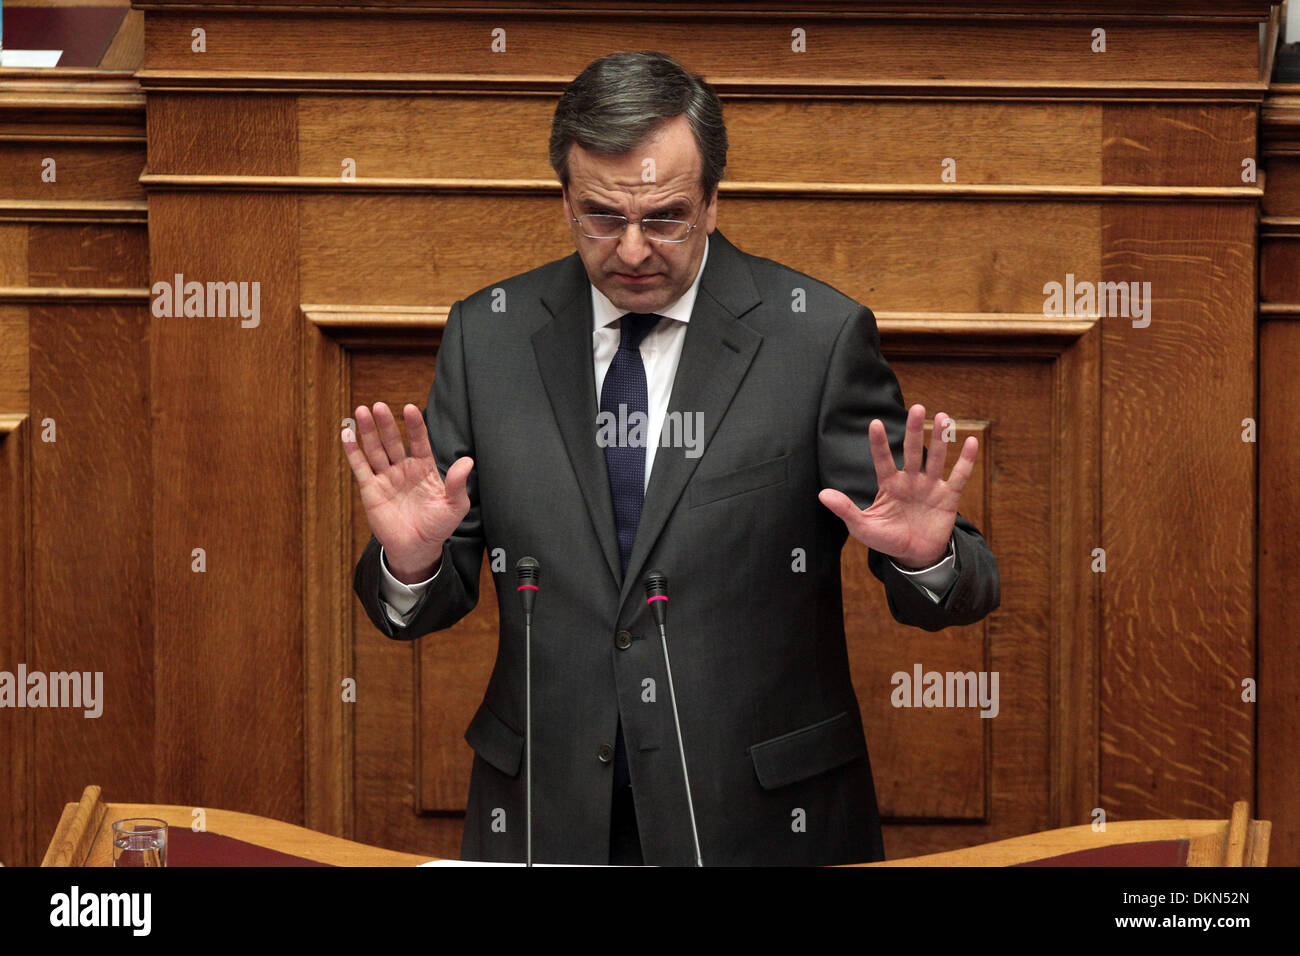 Athens, Greece. 7th Dec, 2013. Greek Prime Minister Antonis Samaras delivers a speech during debate in parliament ahead of a vote on the 2014 budget draft in Athens, Greece, Dec. 7, 2013. © Marios Lolos/Xinhua/Alamy Live News Stock Photo